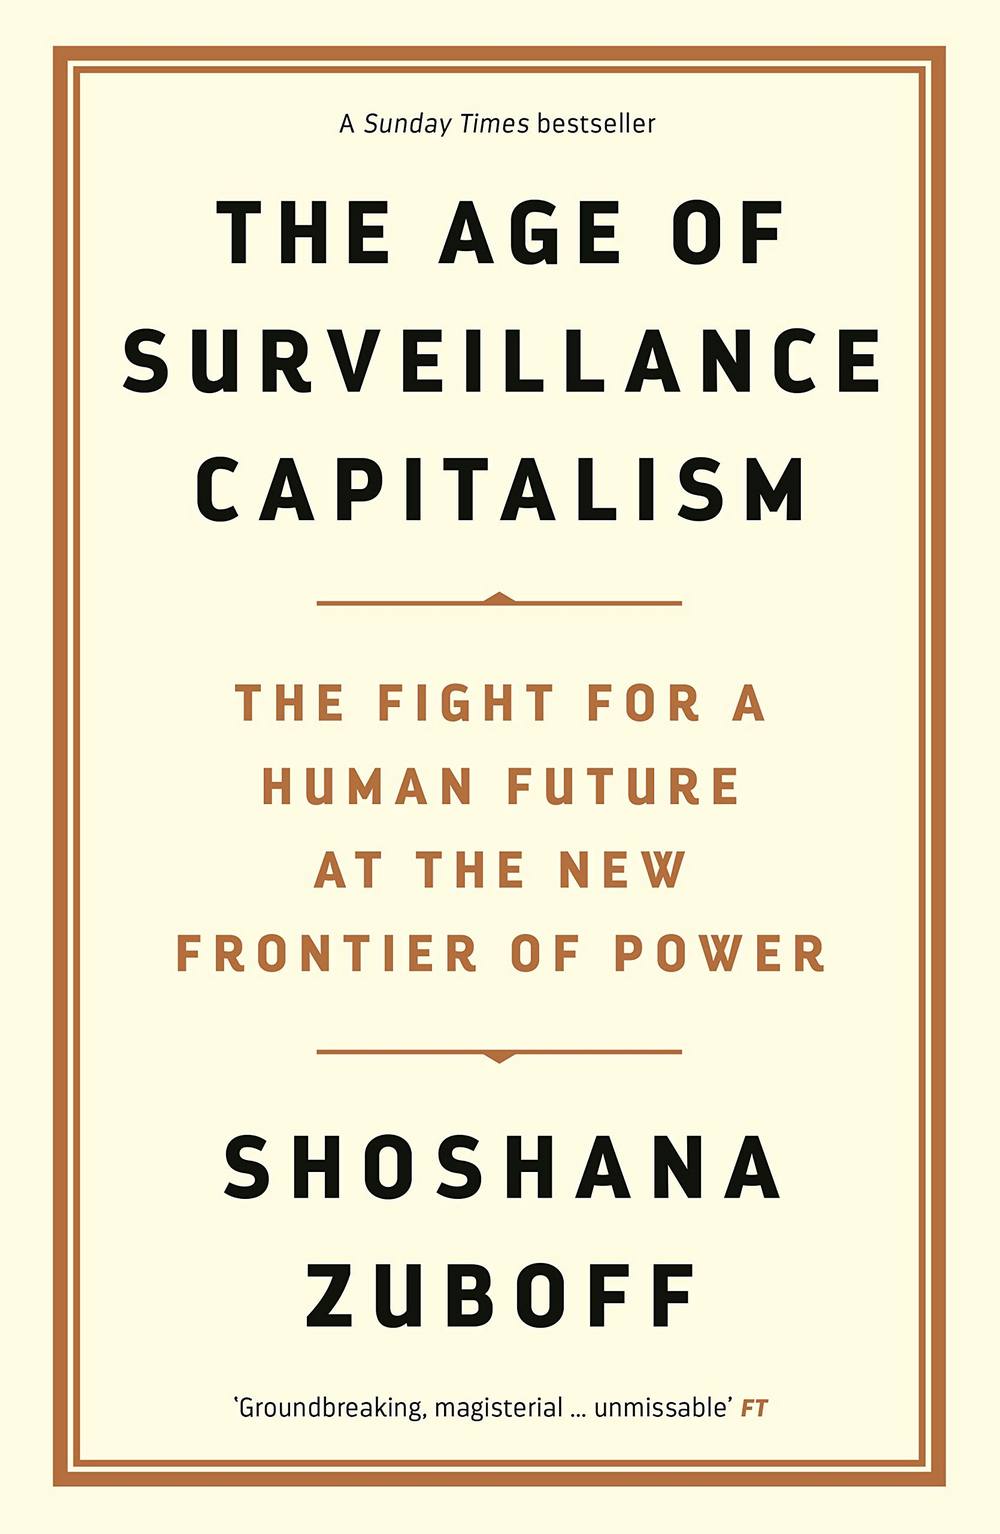 The Age of Surveillance Capitalism book cover